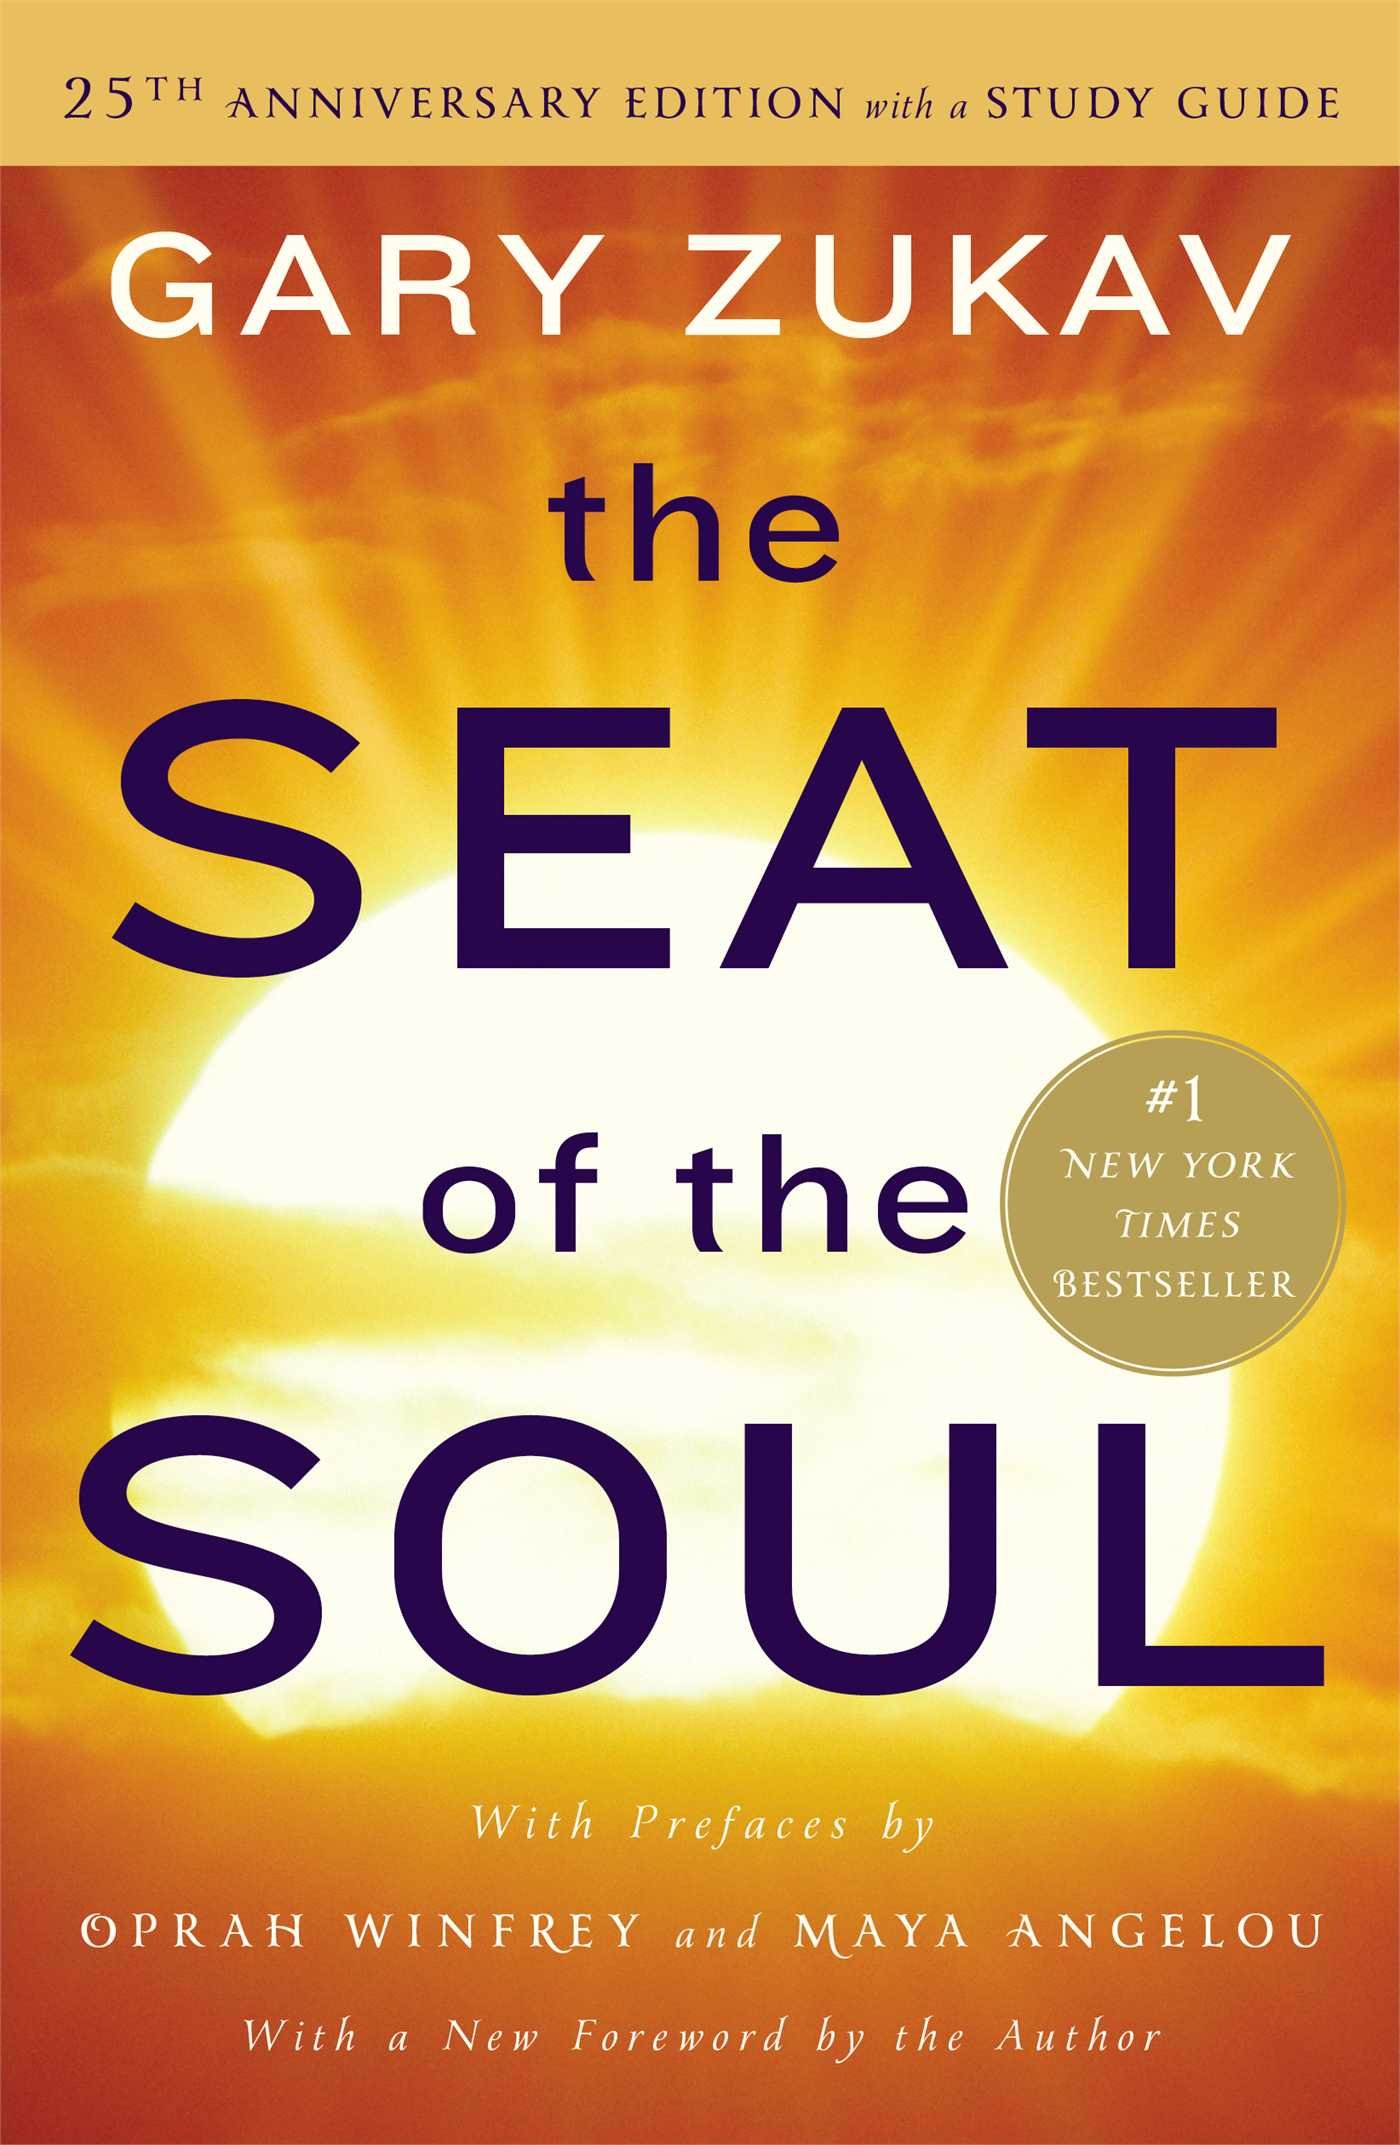 The book cover for The Seat of the Soul.